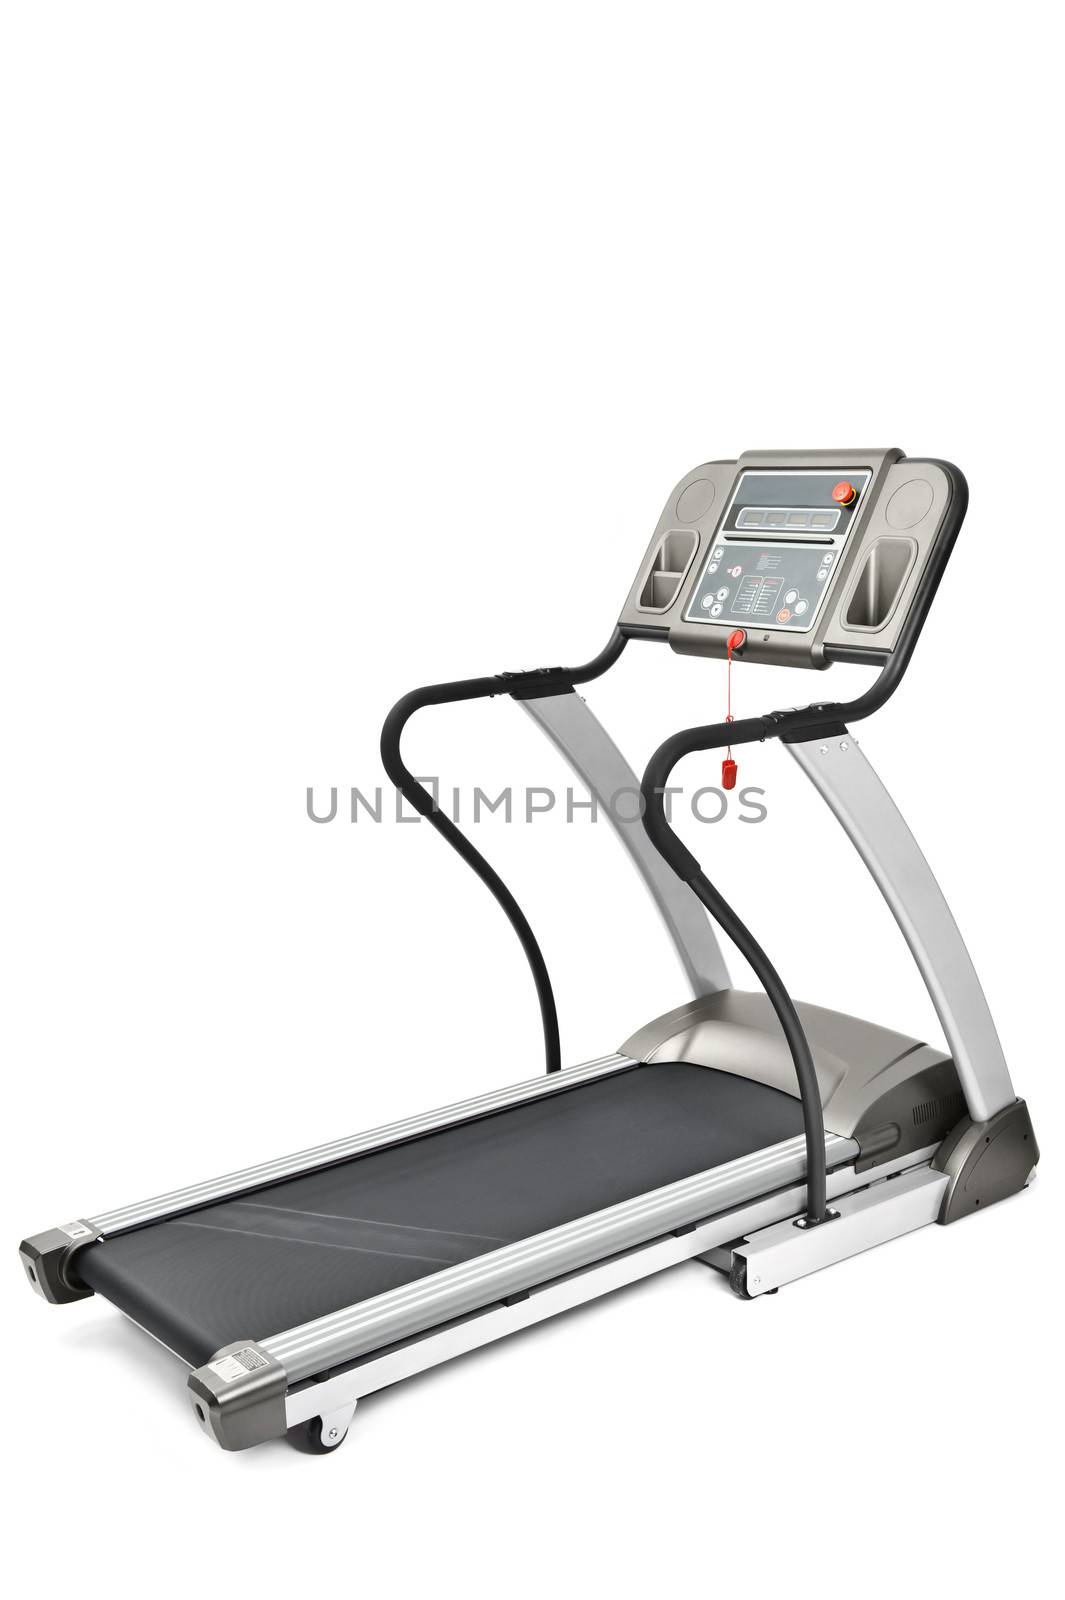 gym equipment, spinning machine for cardio workouts